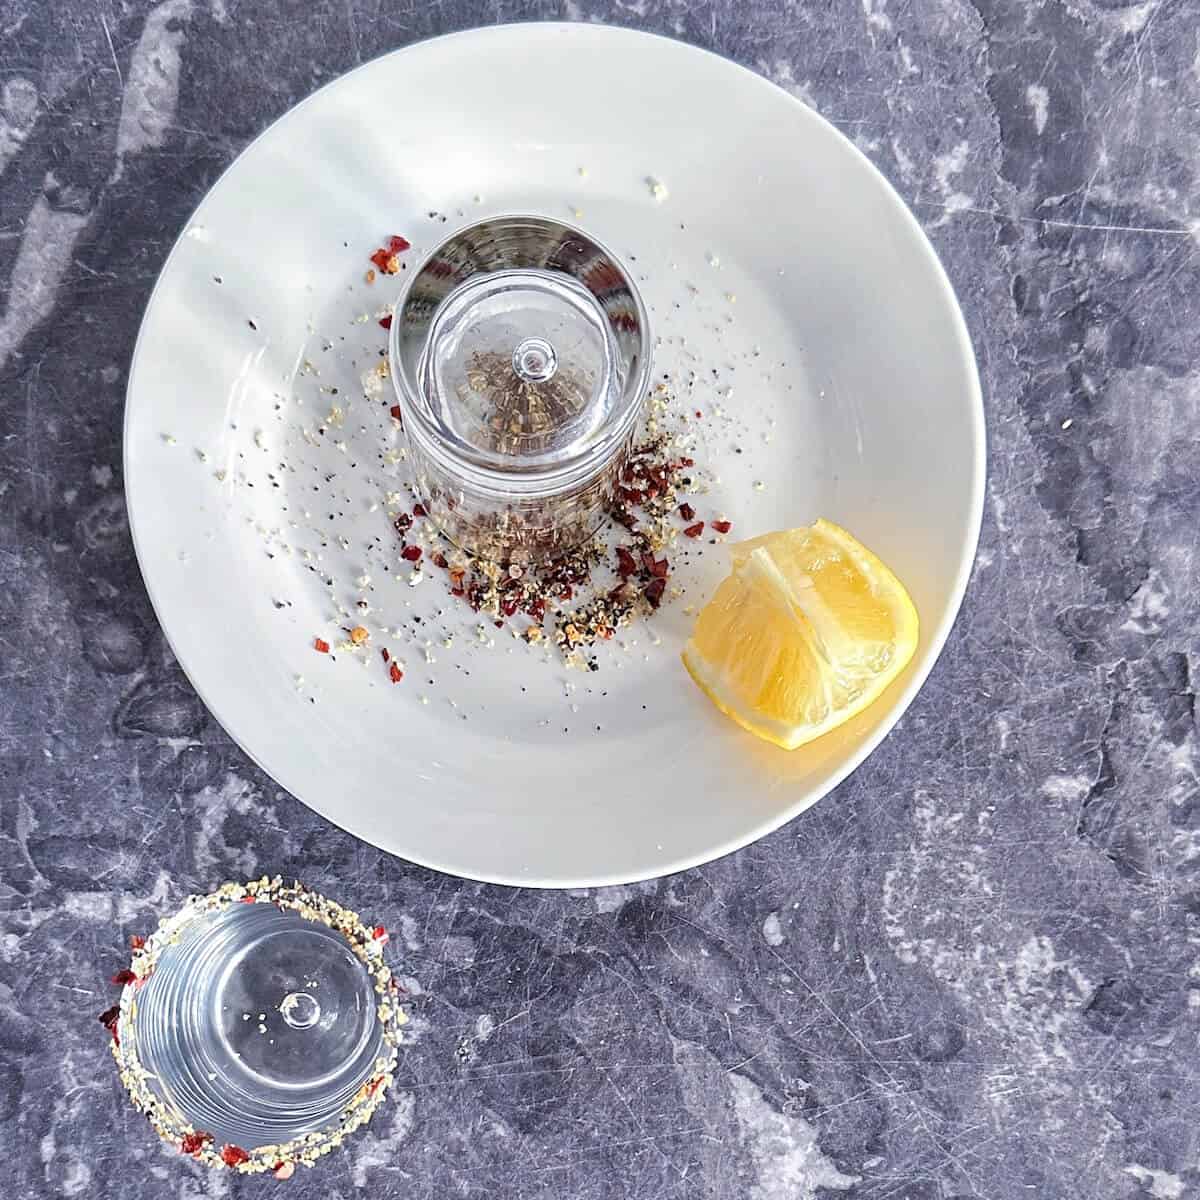 A shot glass being dipped into a plate of salt to make a rim. 